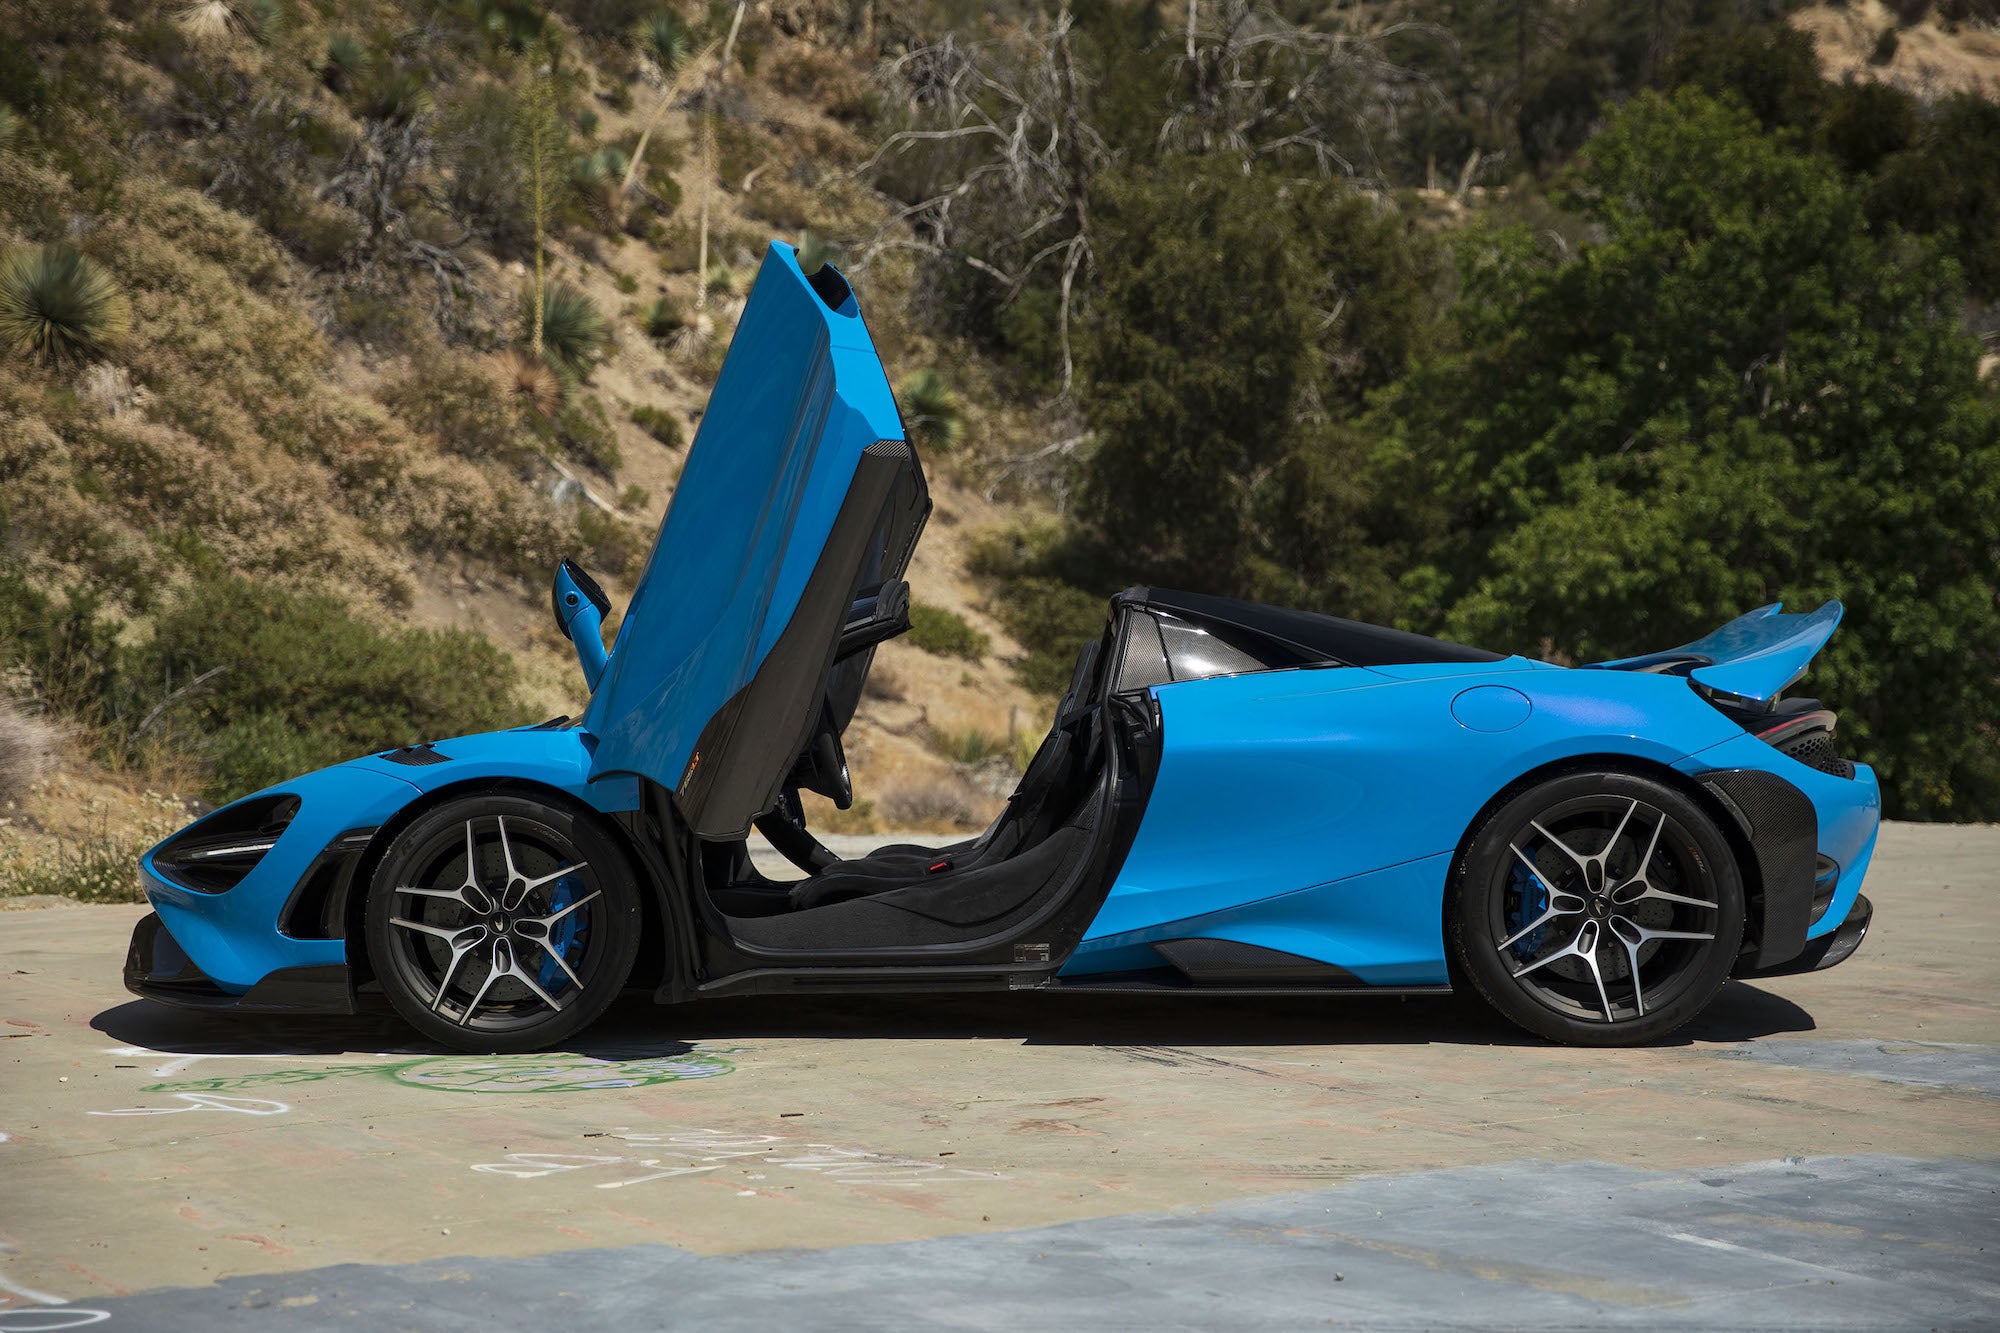 McLaren’s newest supercar will have your hair blowing in the wind in 11 seconds